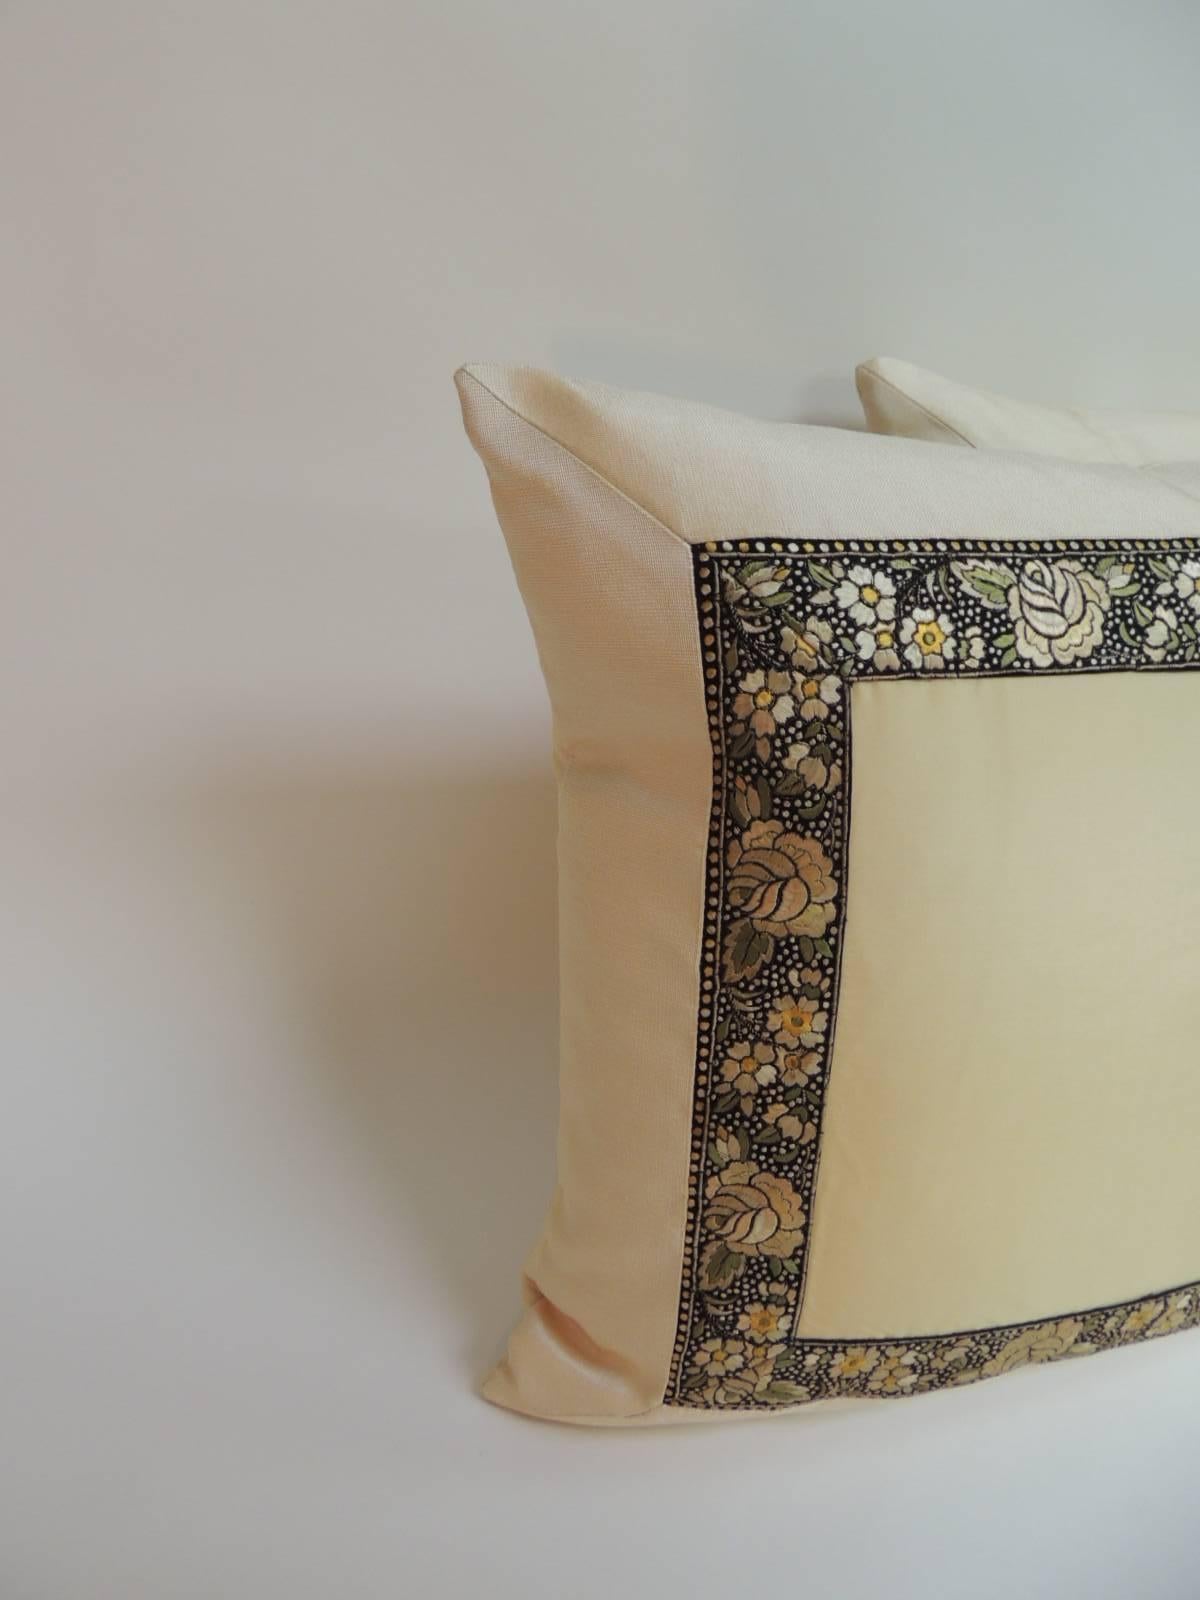 Antique Textiles Galleries:
Pair of vintage yellow and black embroidery Japanese silk ribbon decorative pillows. Framed with yellow silk in the centre and soft ecru color frame and backings. In shades of yellow, ecru, black, copper and